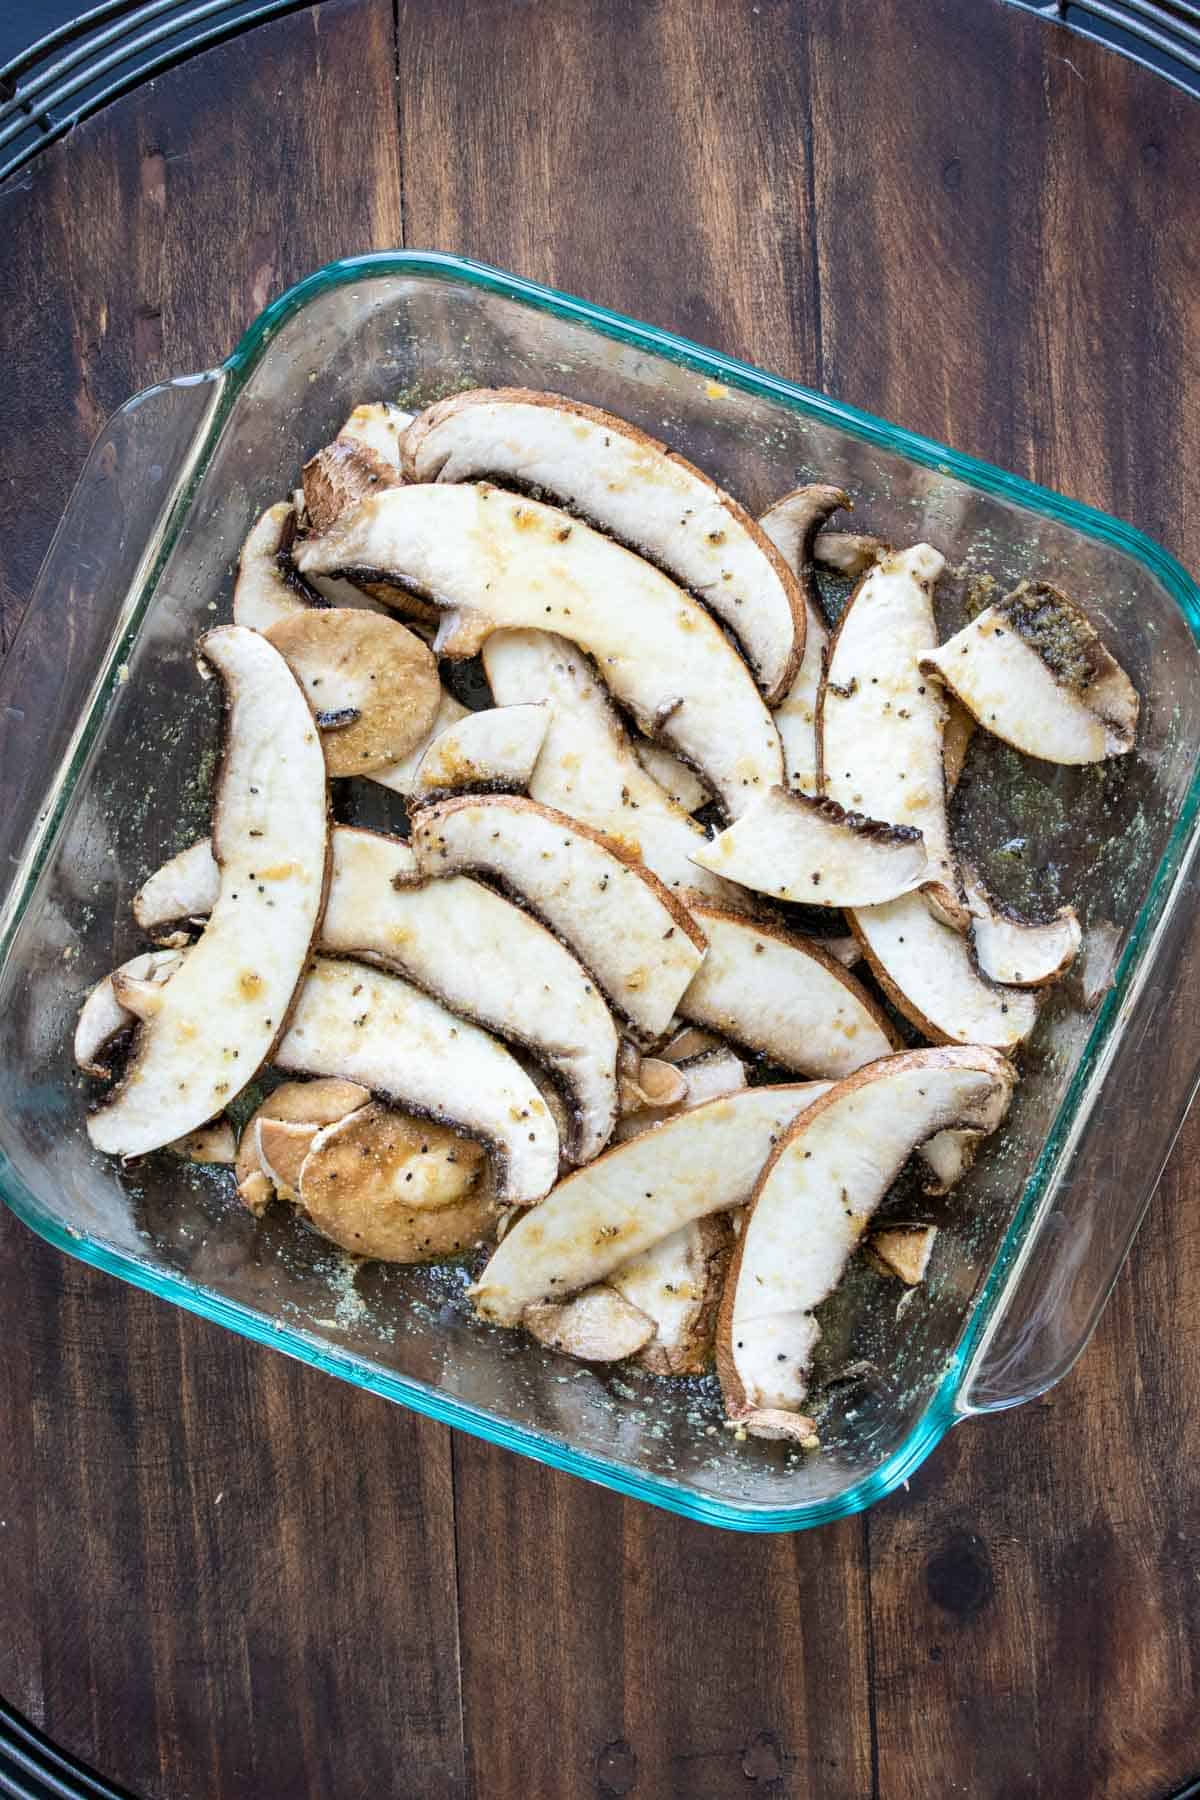 Slices of portobello mushroom topped with spices in a glass baking dish